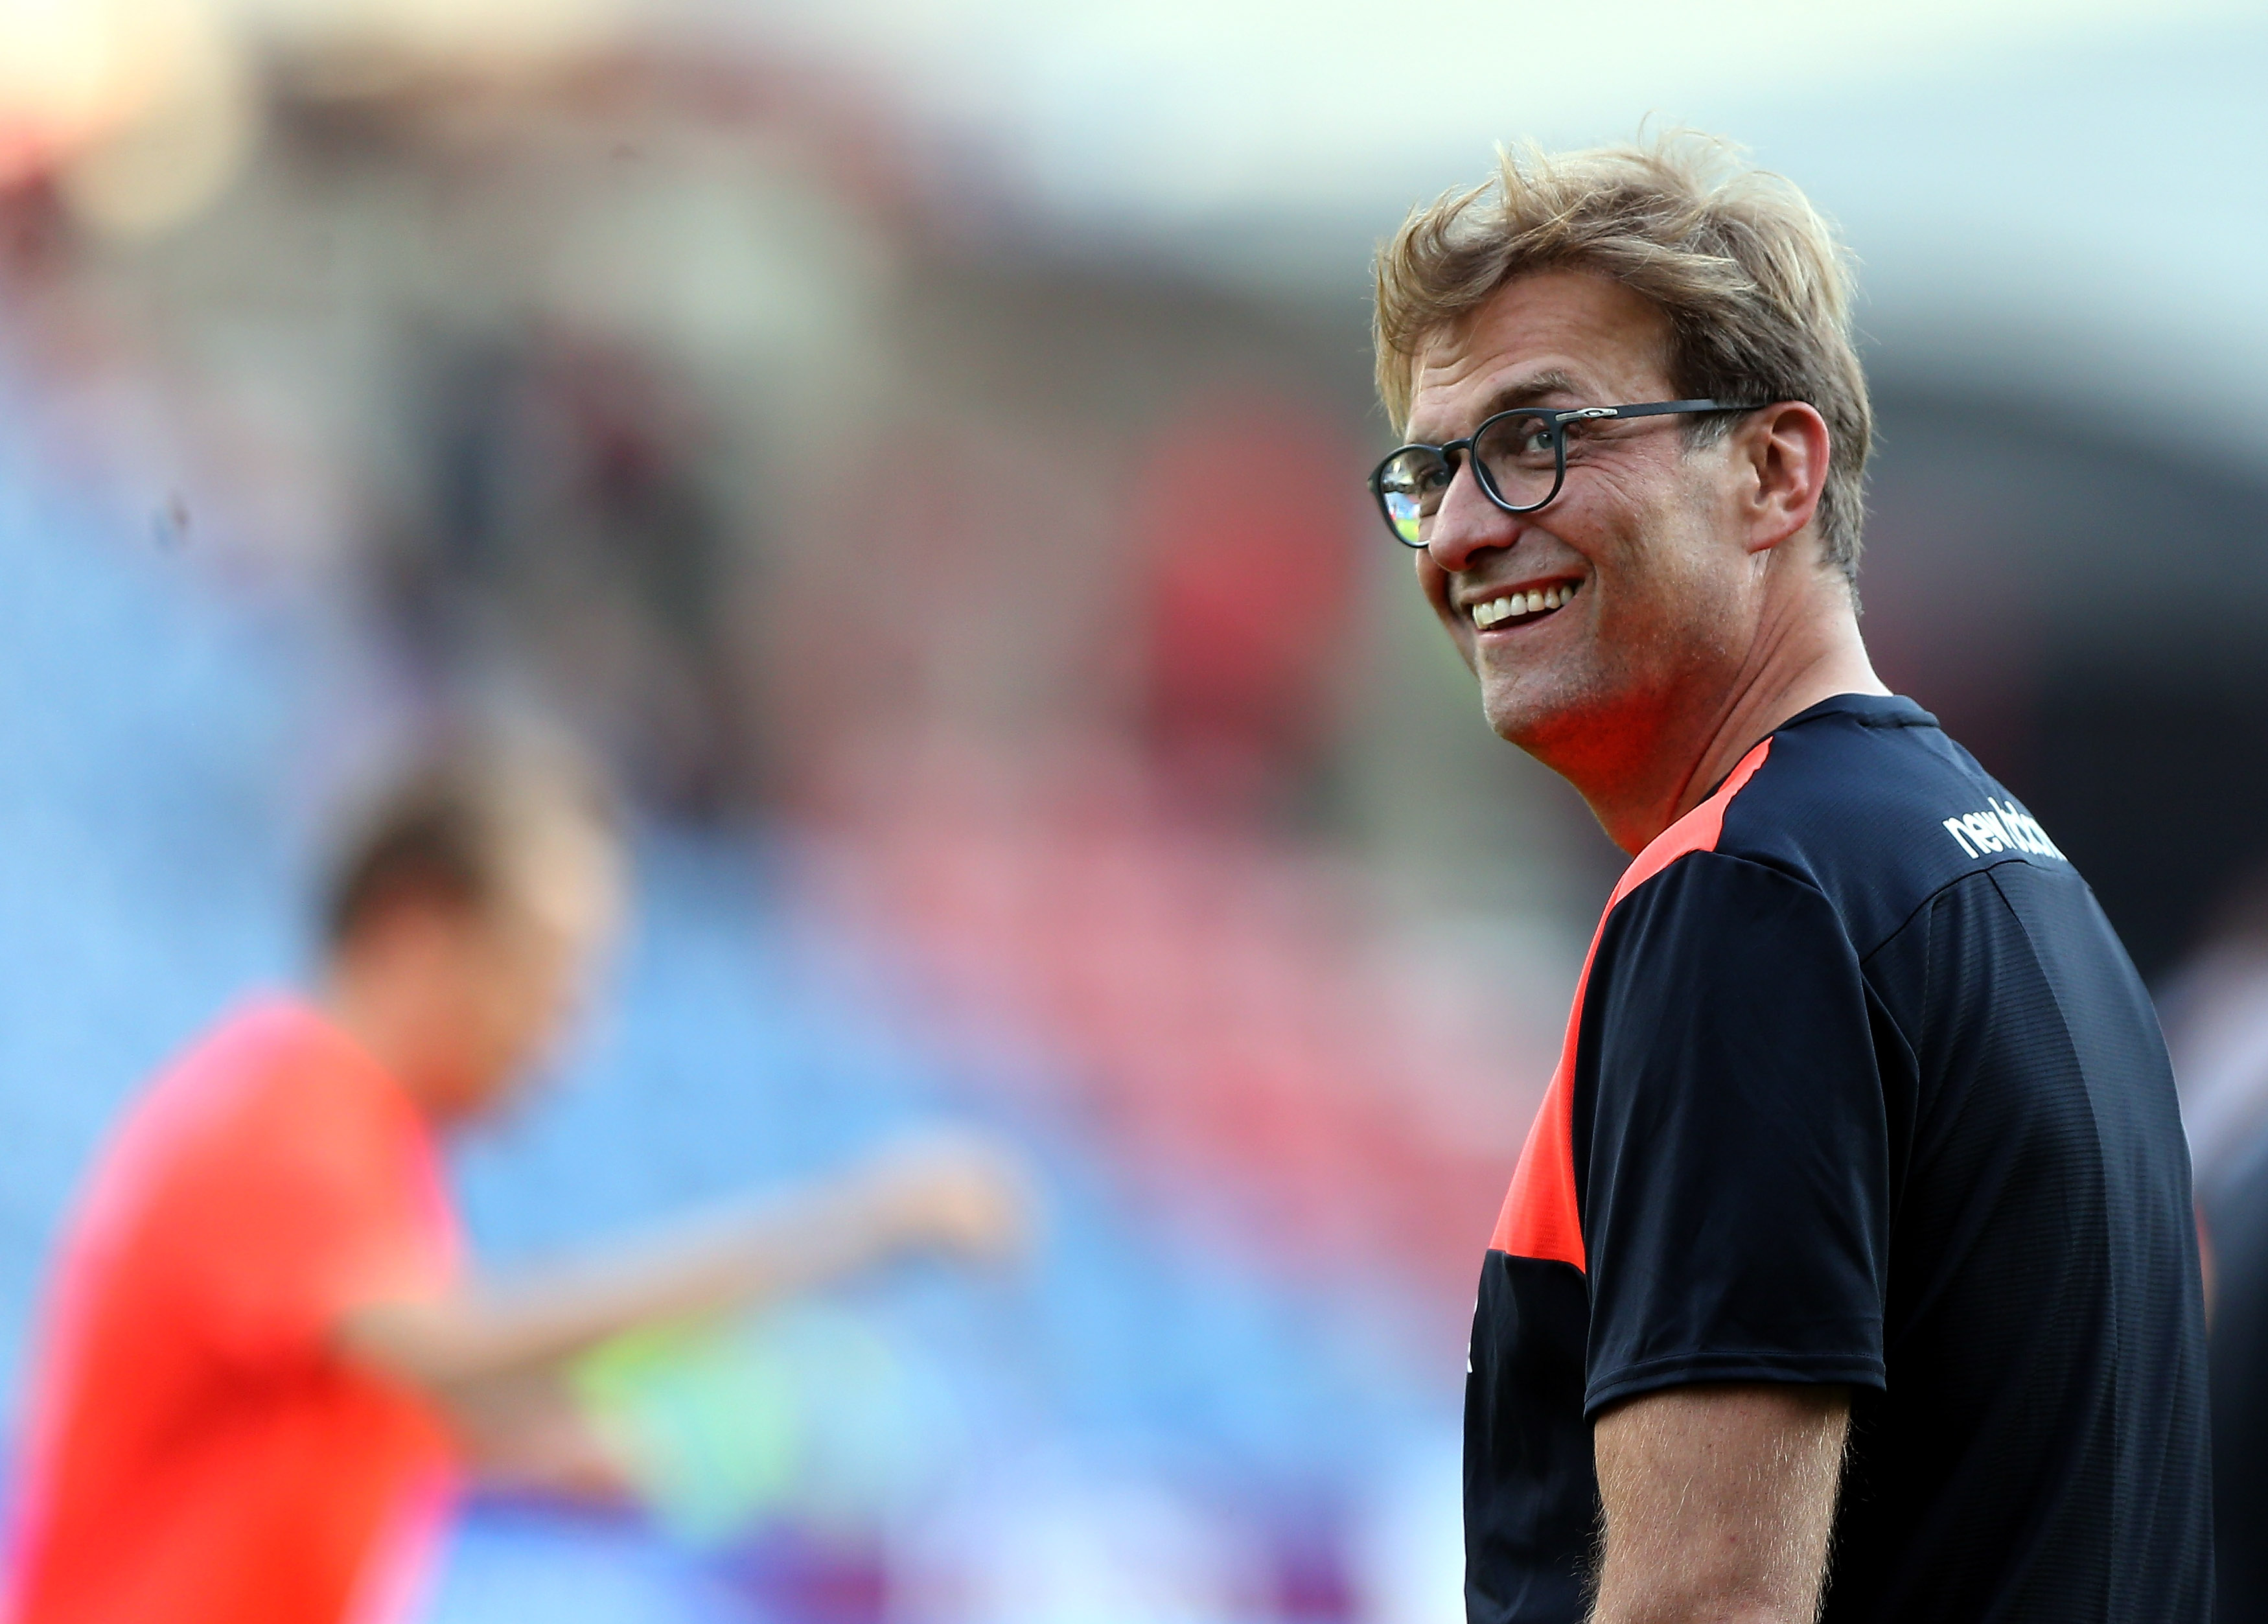 HUDDERSFIELD, ENGLAND - JULY 20:  Juergen Klopp manager of Liverpool smiles prior the Pre-Season Friendly match between Huddersfield Town and Liverpool at the Galpharm Stadium on July 20, 2016 in Huddersfield, England.  (Photo by Nigel Roddis/Getty Images)